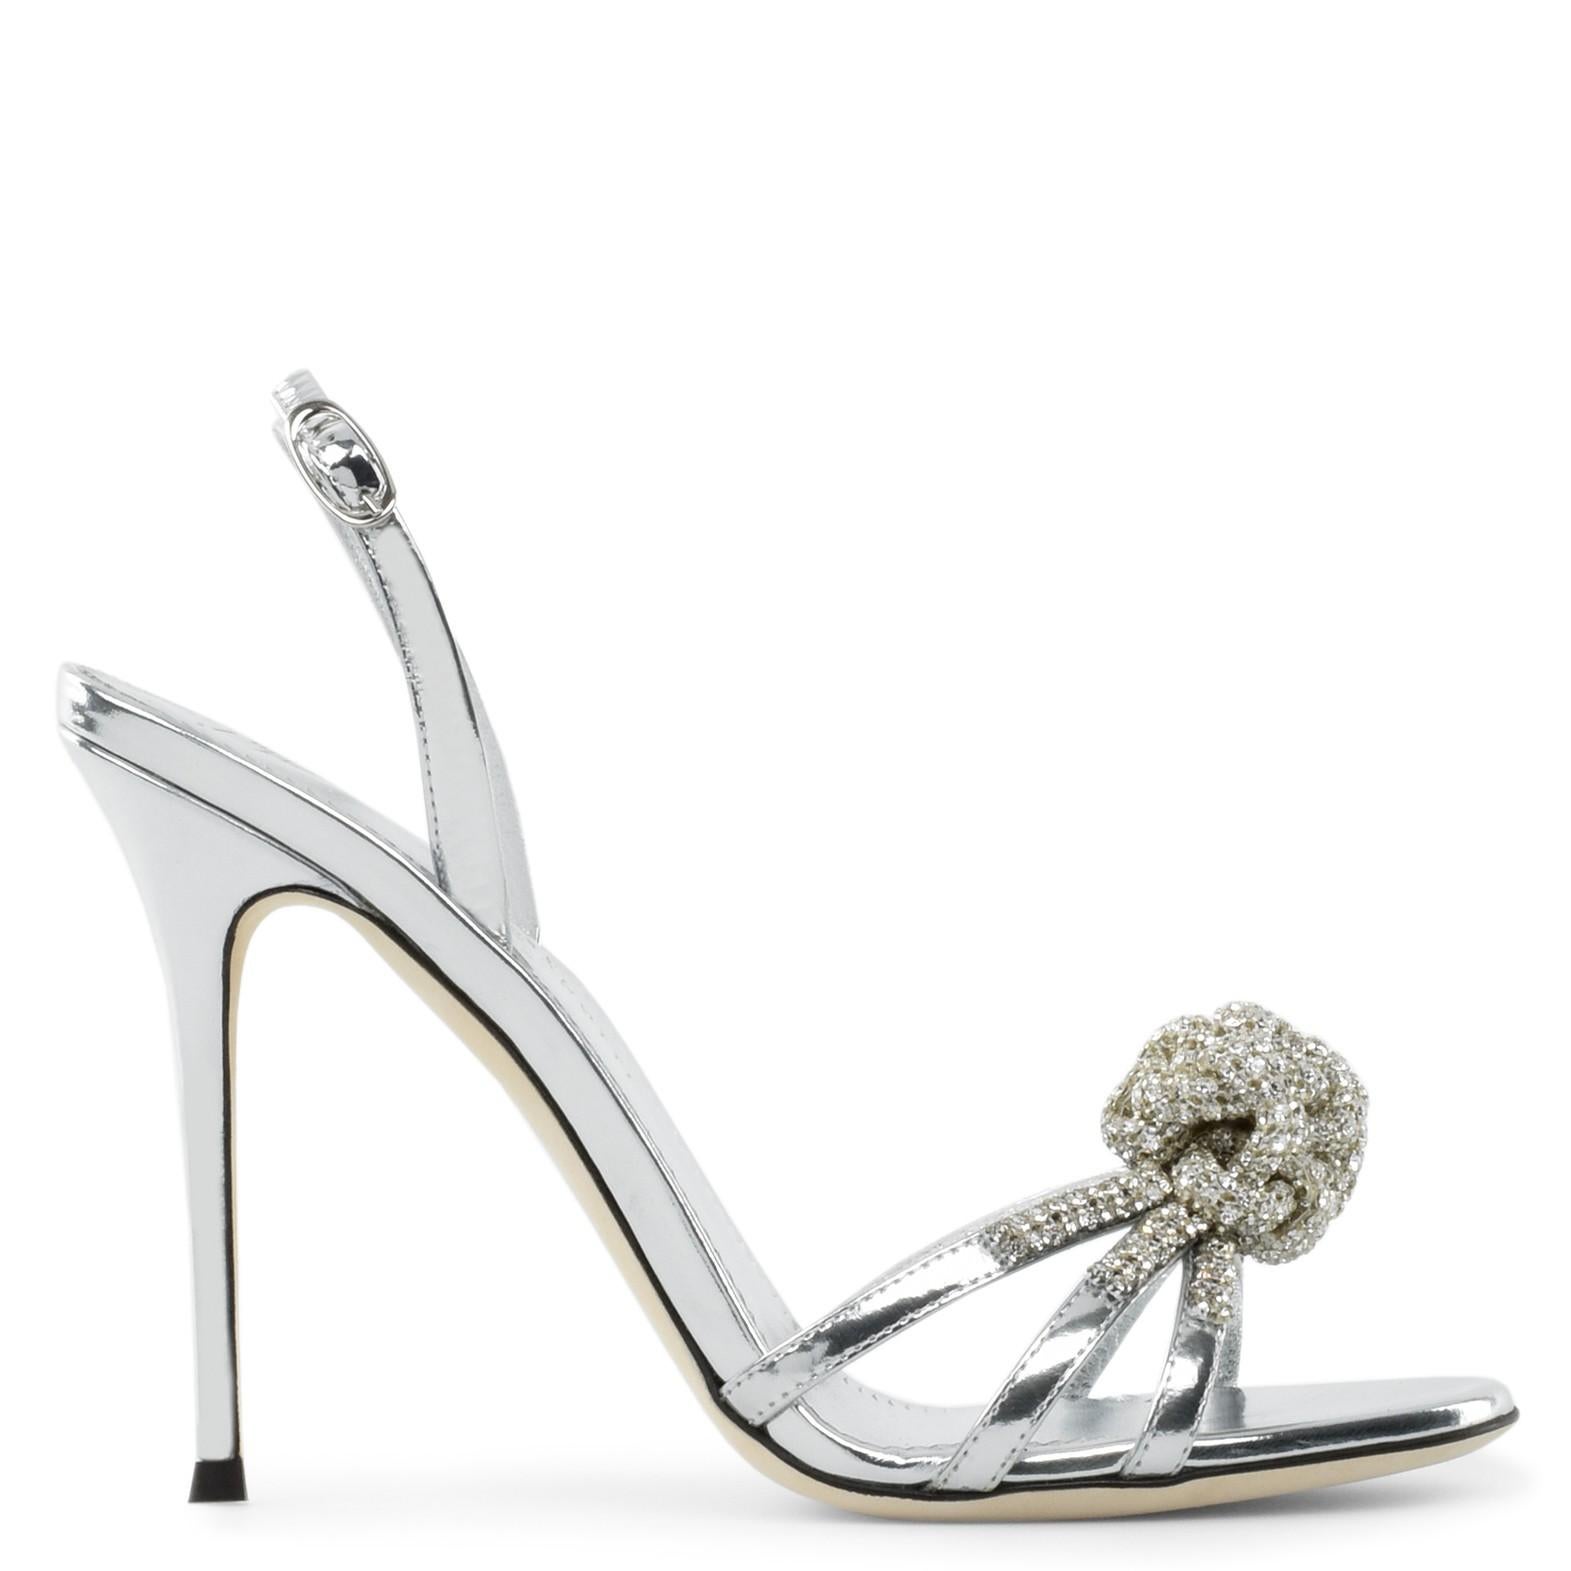 Women's Giuseppe Zanotti NEW Silver Patent Leather Crystal Sandals Heels in Box